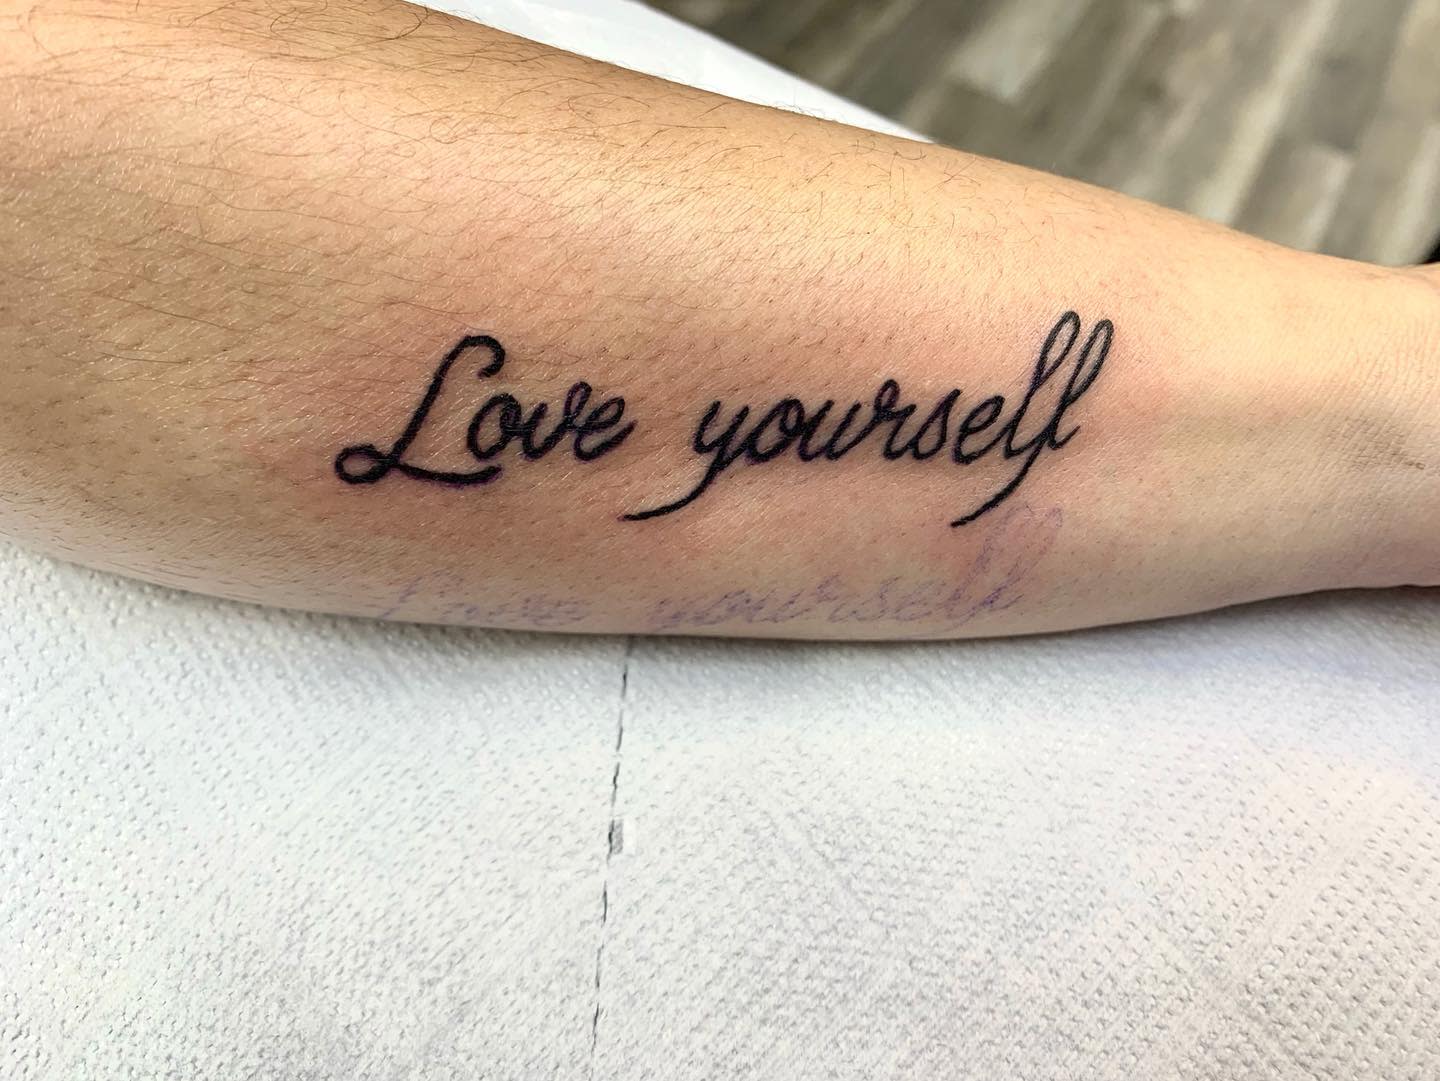 The Top 23 Self Love Tattoo Ideas - [2022 Inspiration Guide]